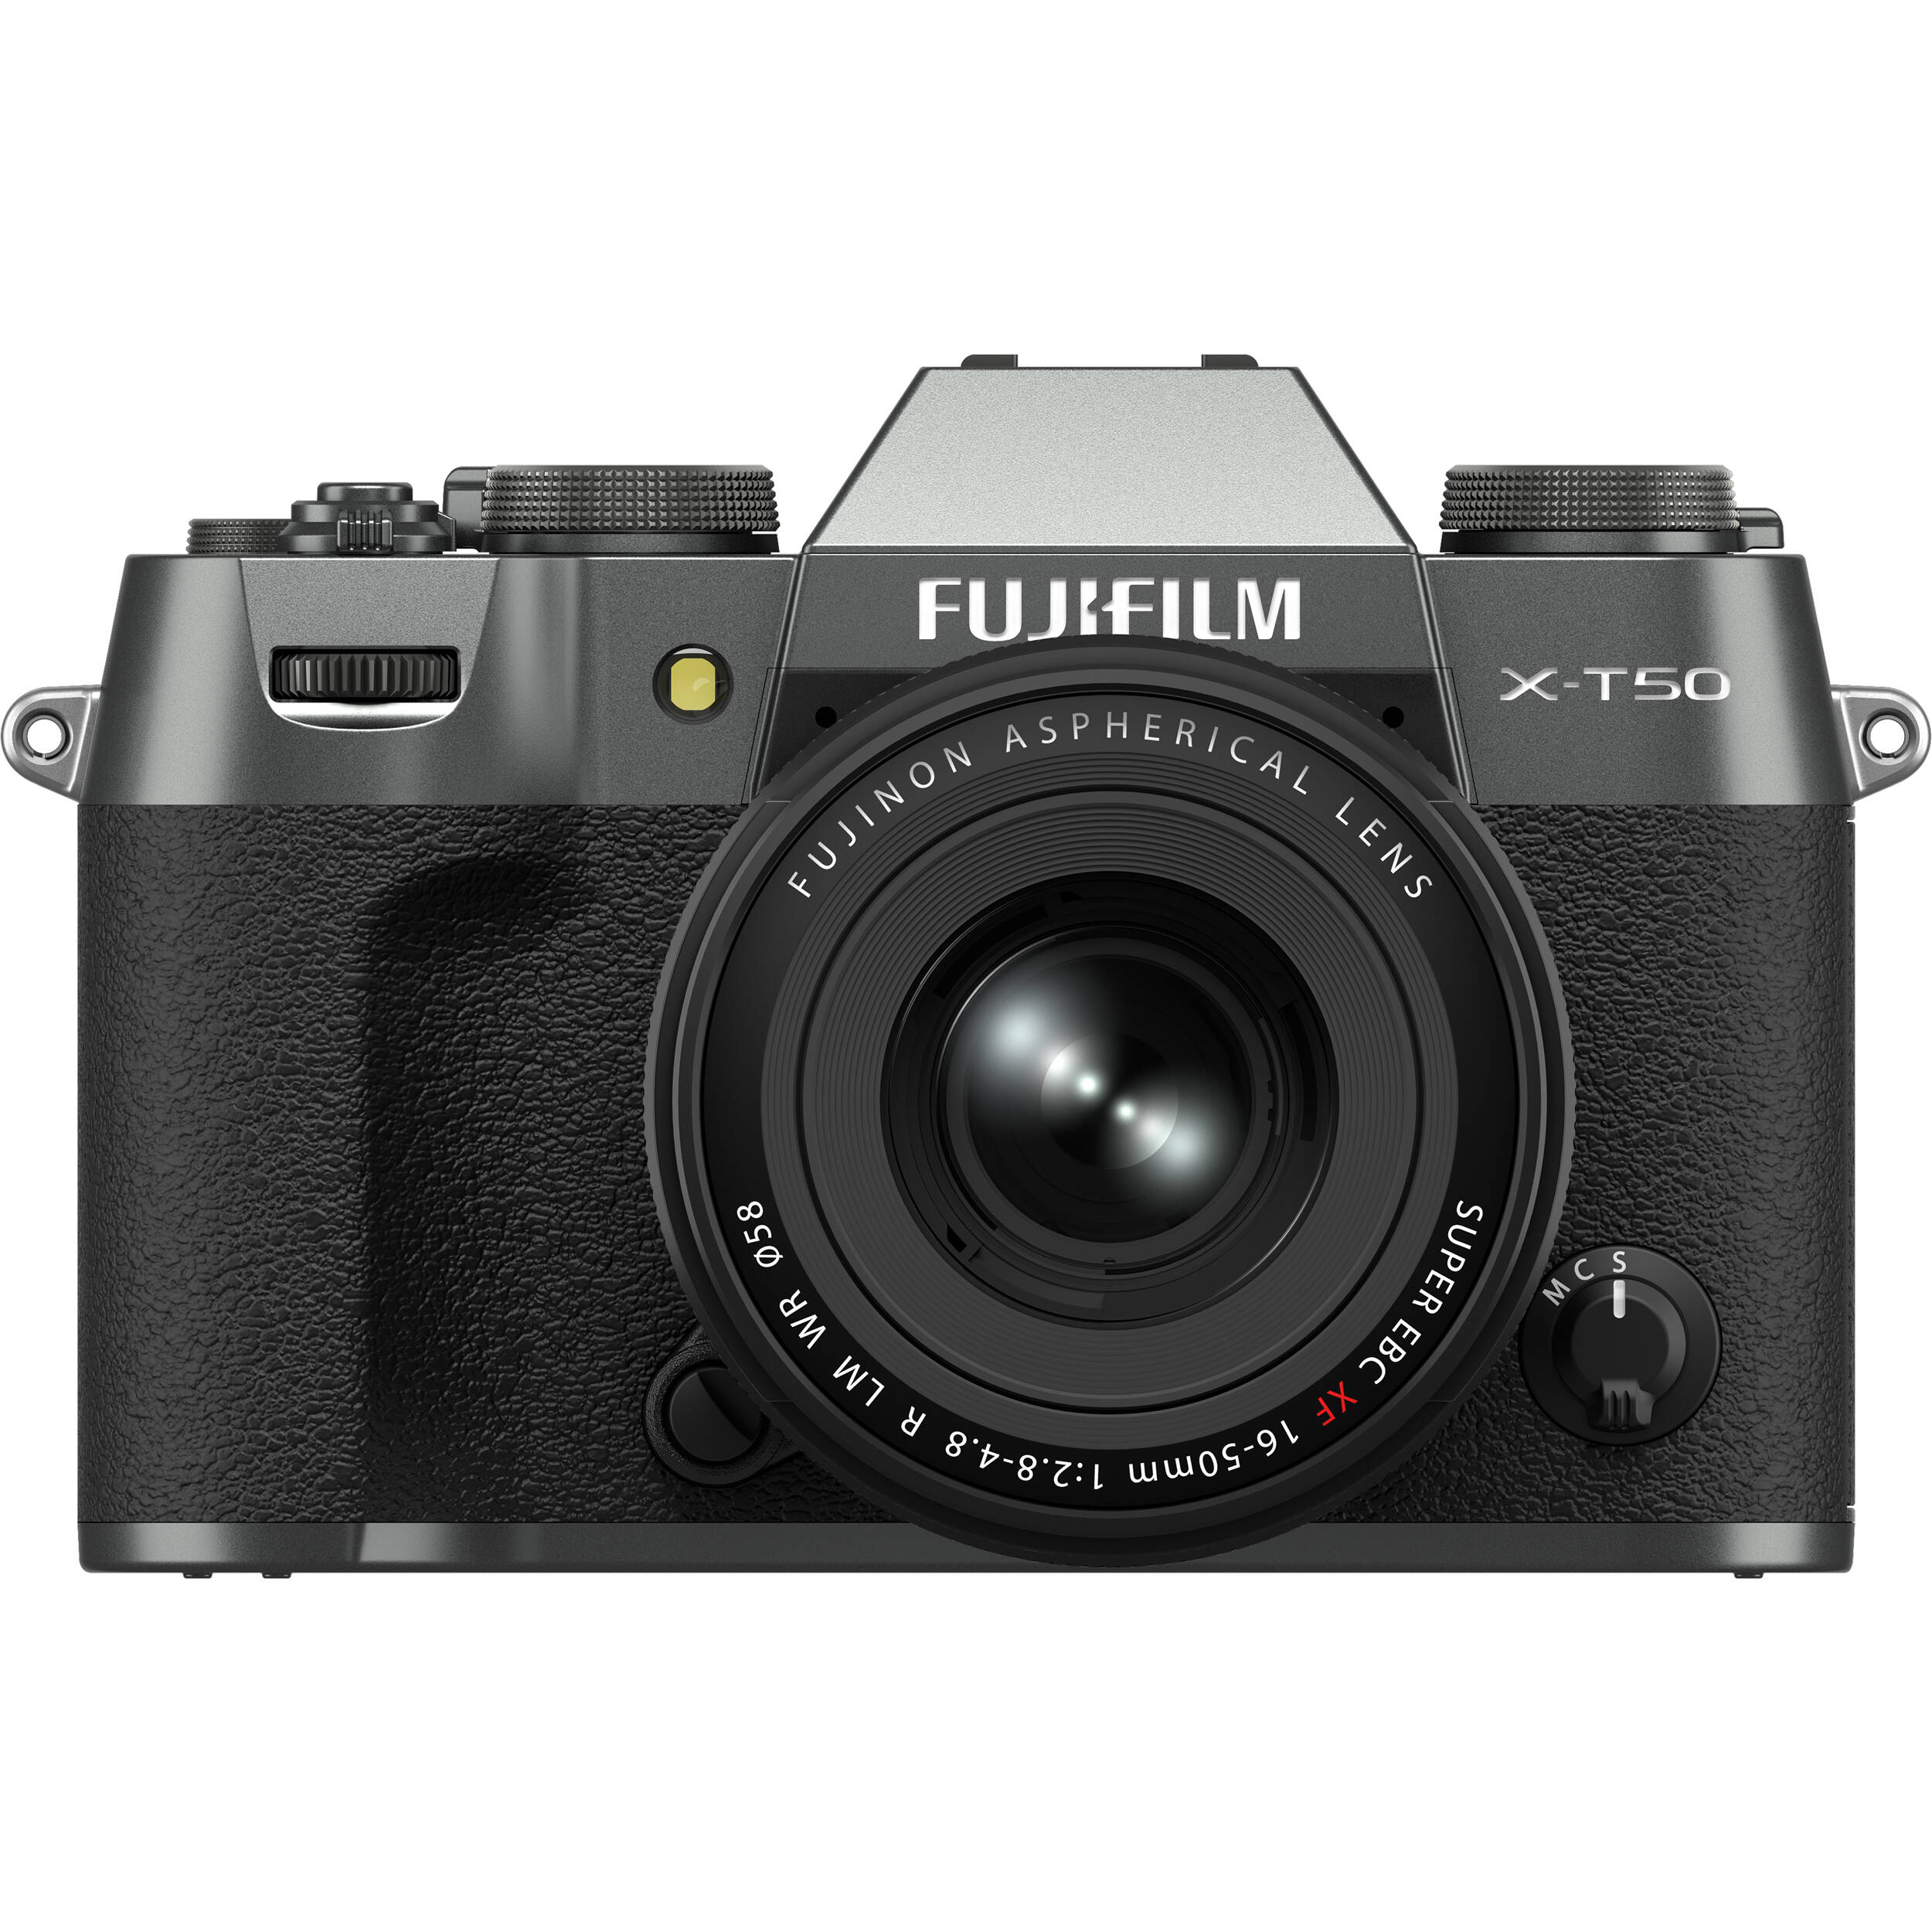 FUJIFILM X-T50 Mirrorless Camera with XF 16-50mm f/2.8-4.8 Lens (Charcoal Silver)